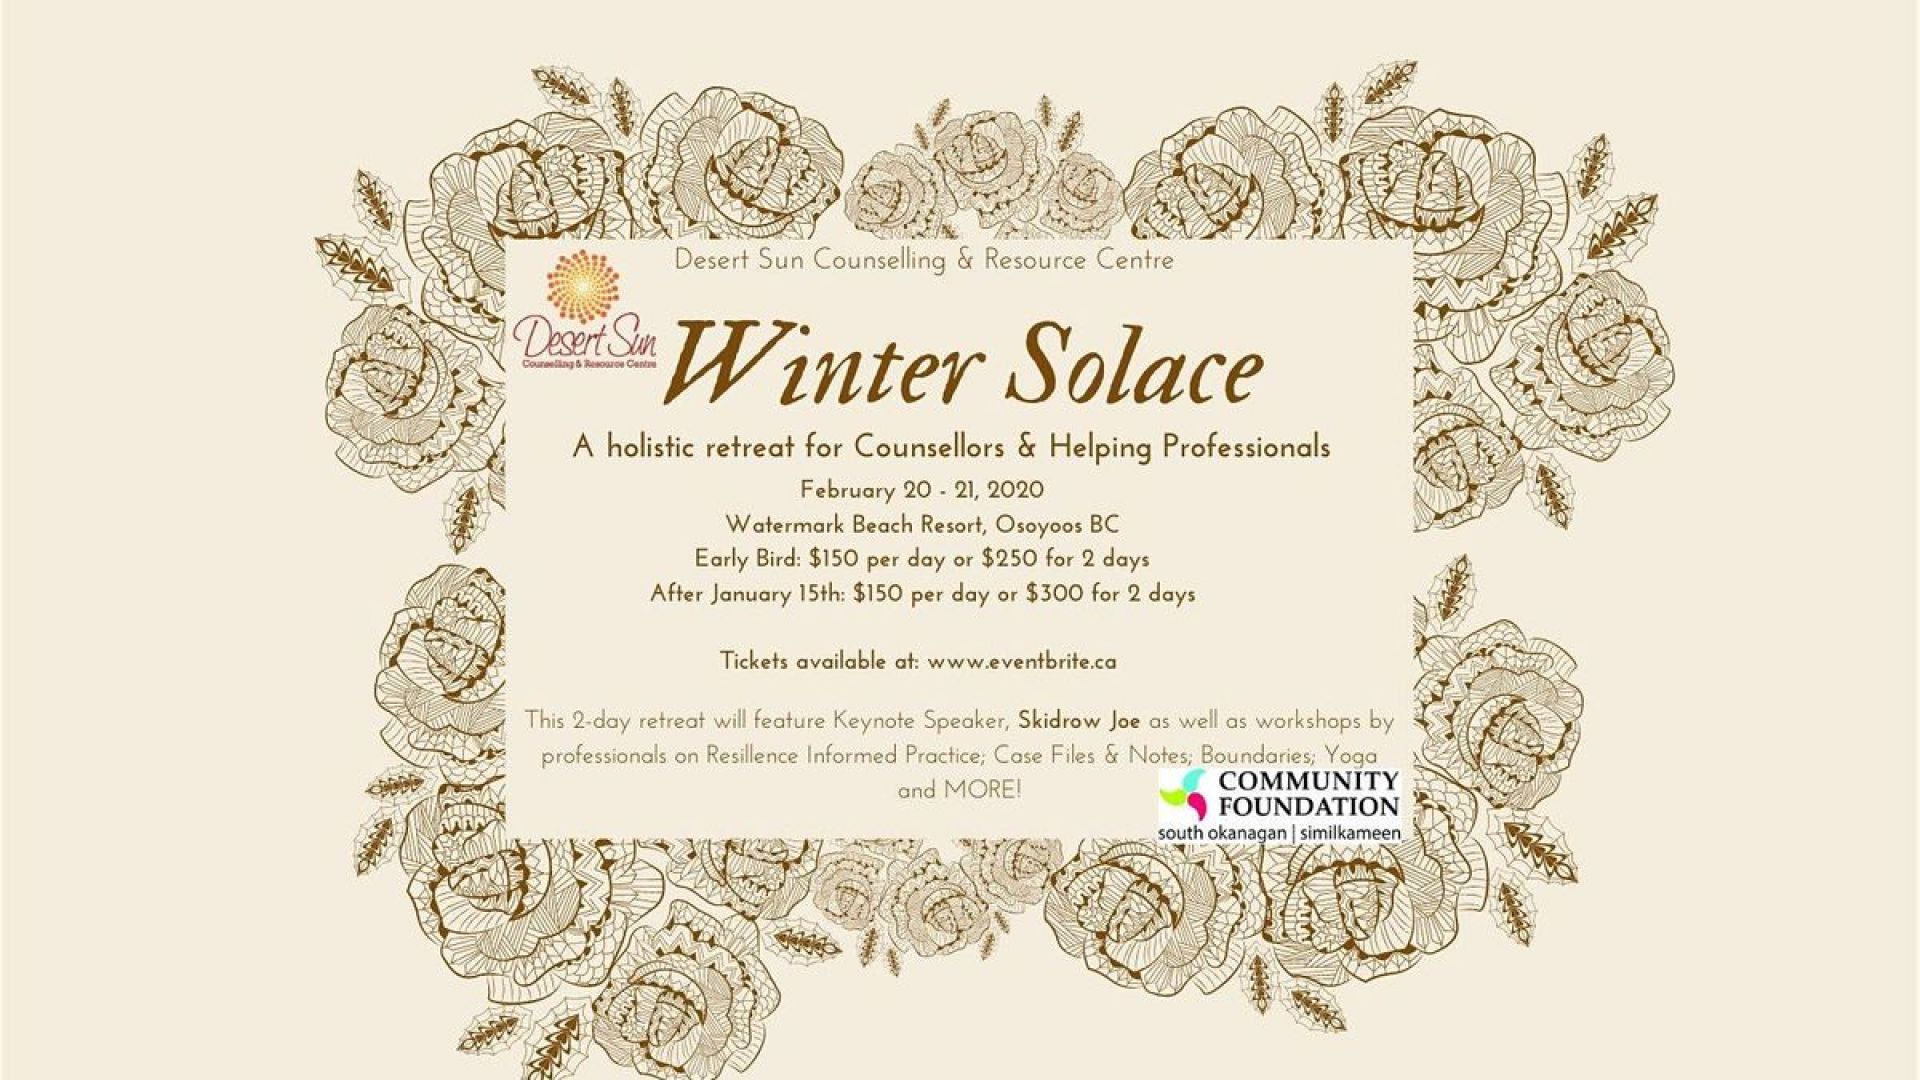 Winter Solace by Desert Sun Counselling & Resource Centre @ Watermark